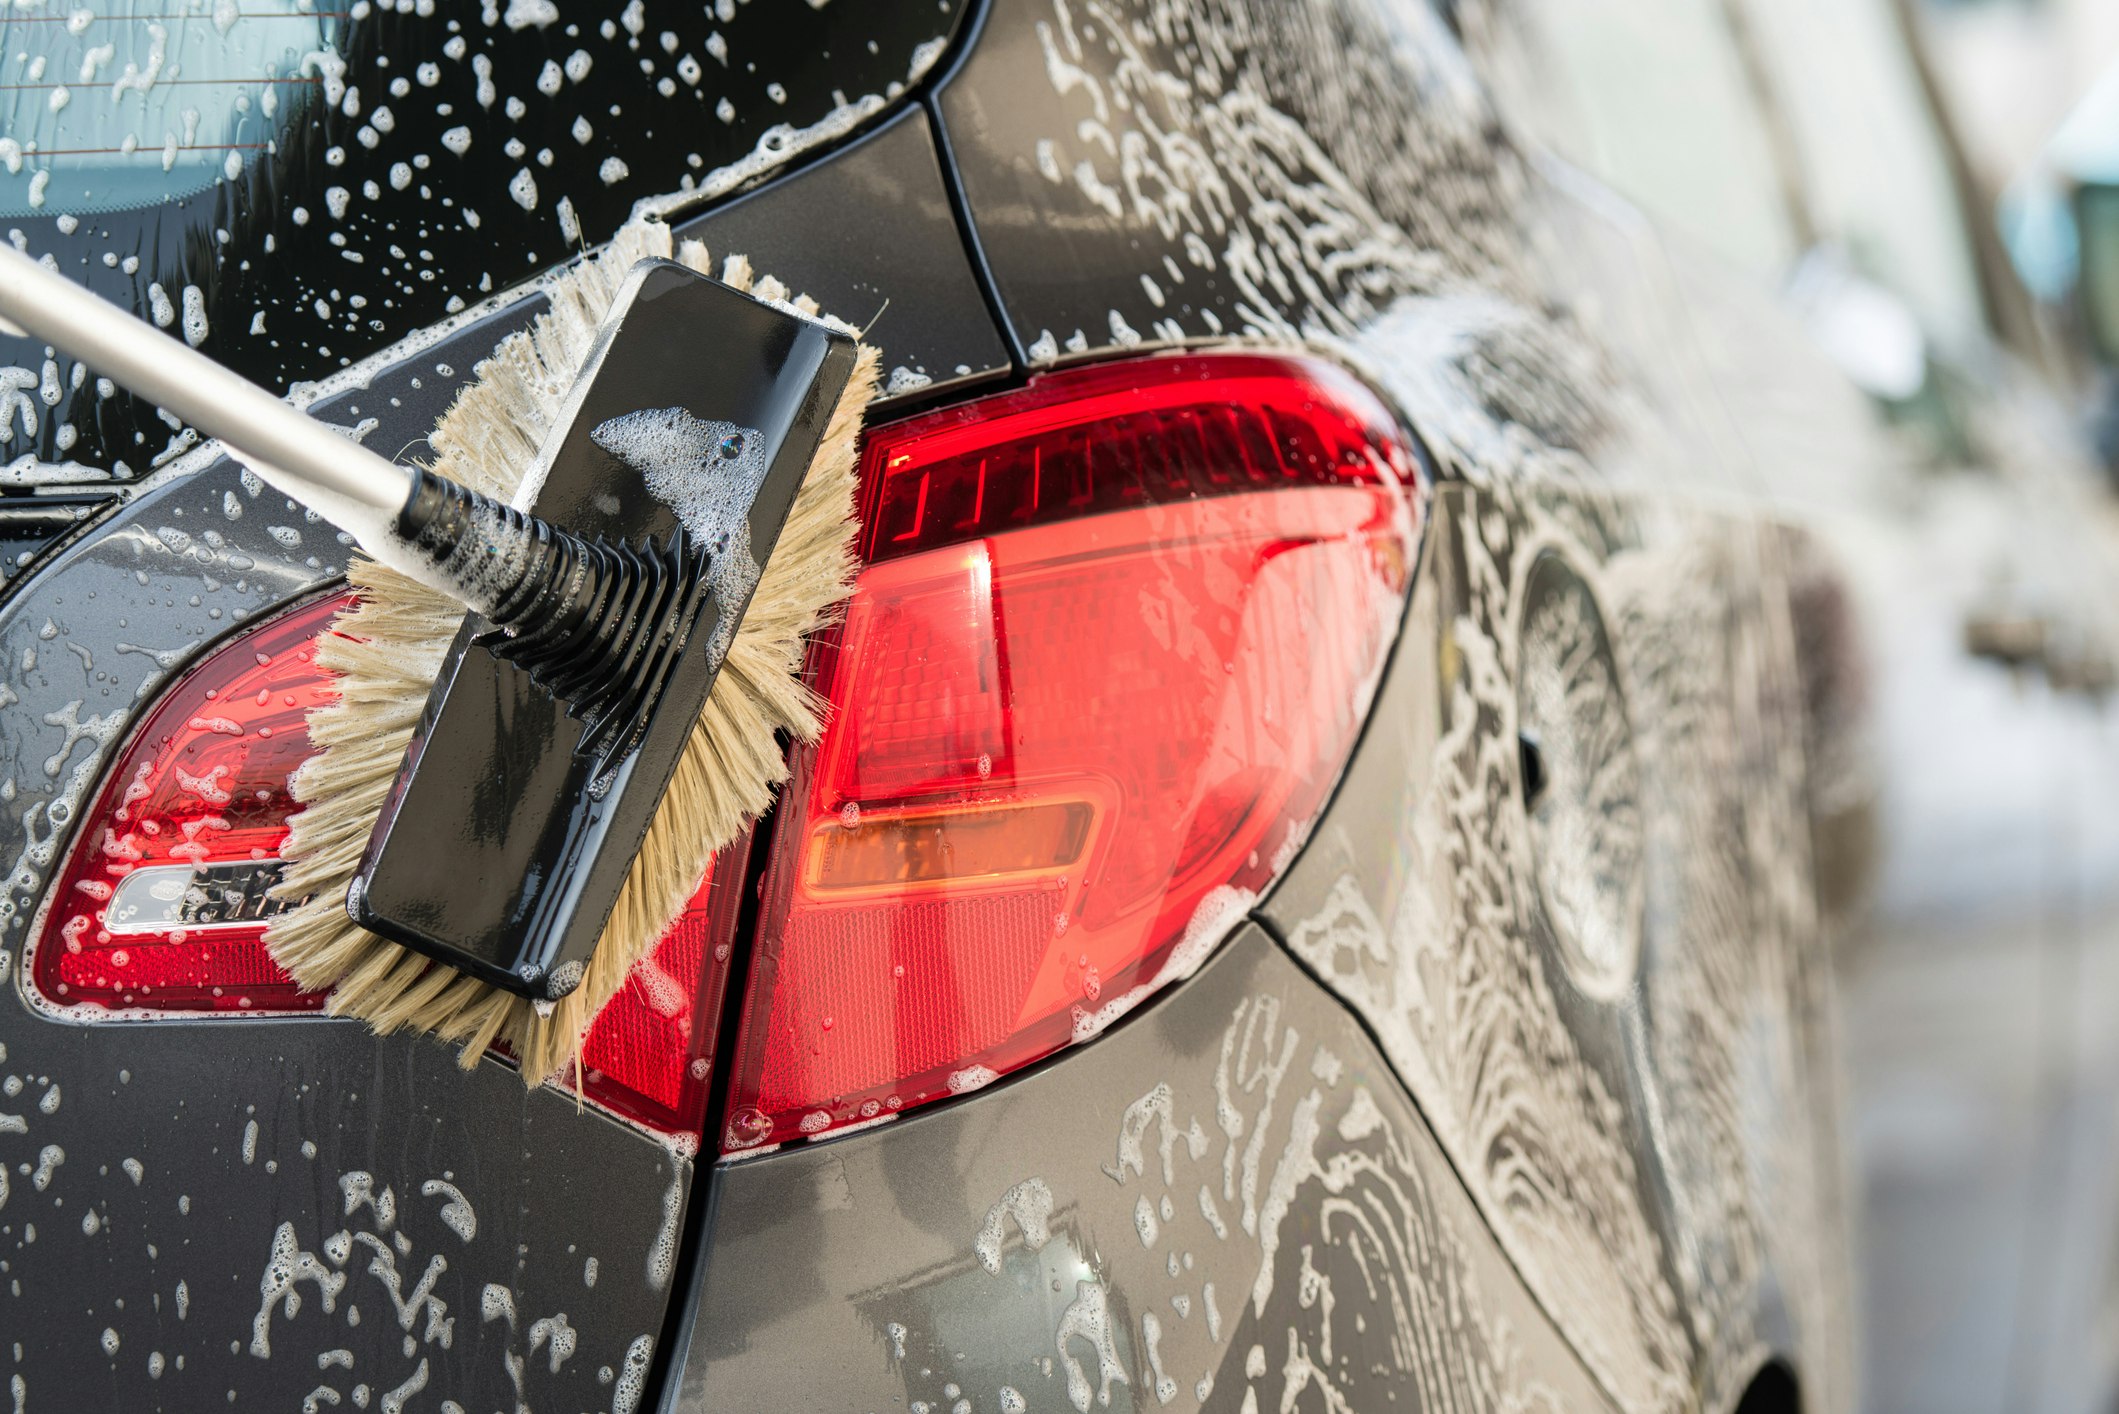 The best car wash brushes for wheels and bodywork